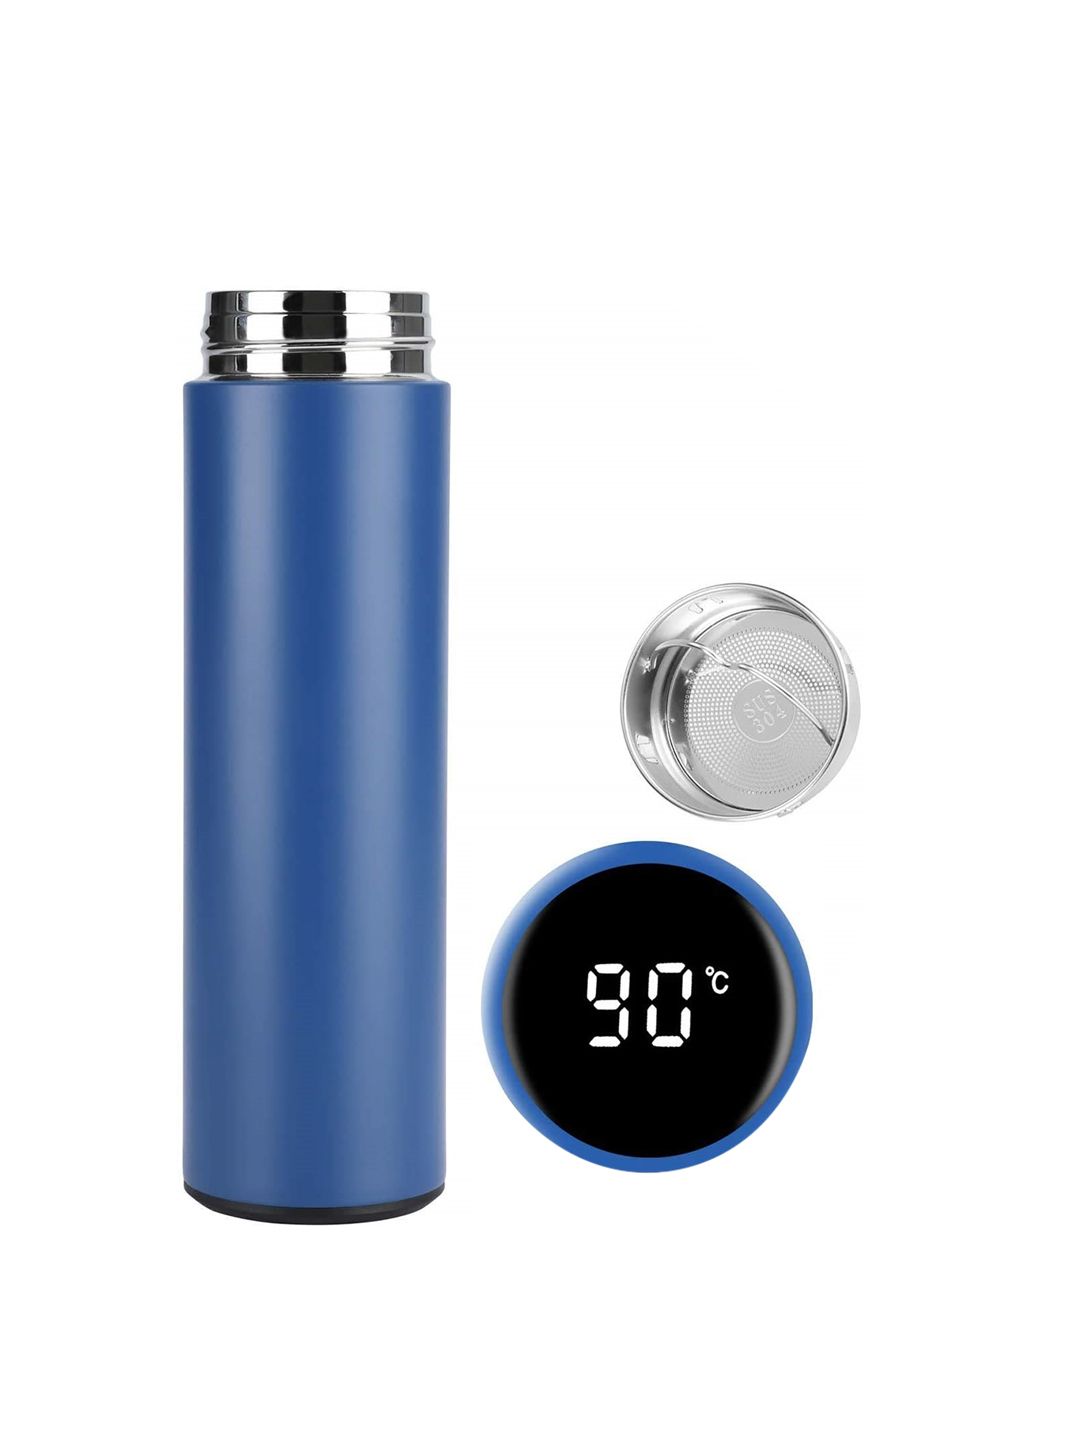 Frabble8 Blue Vacuum Insulated Stainless Steel LED Temperature Display Water Bottle  500ml Price in India